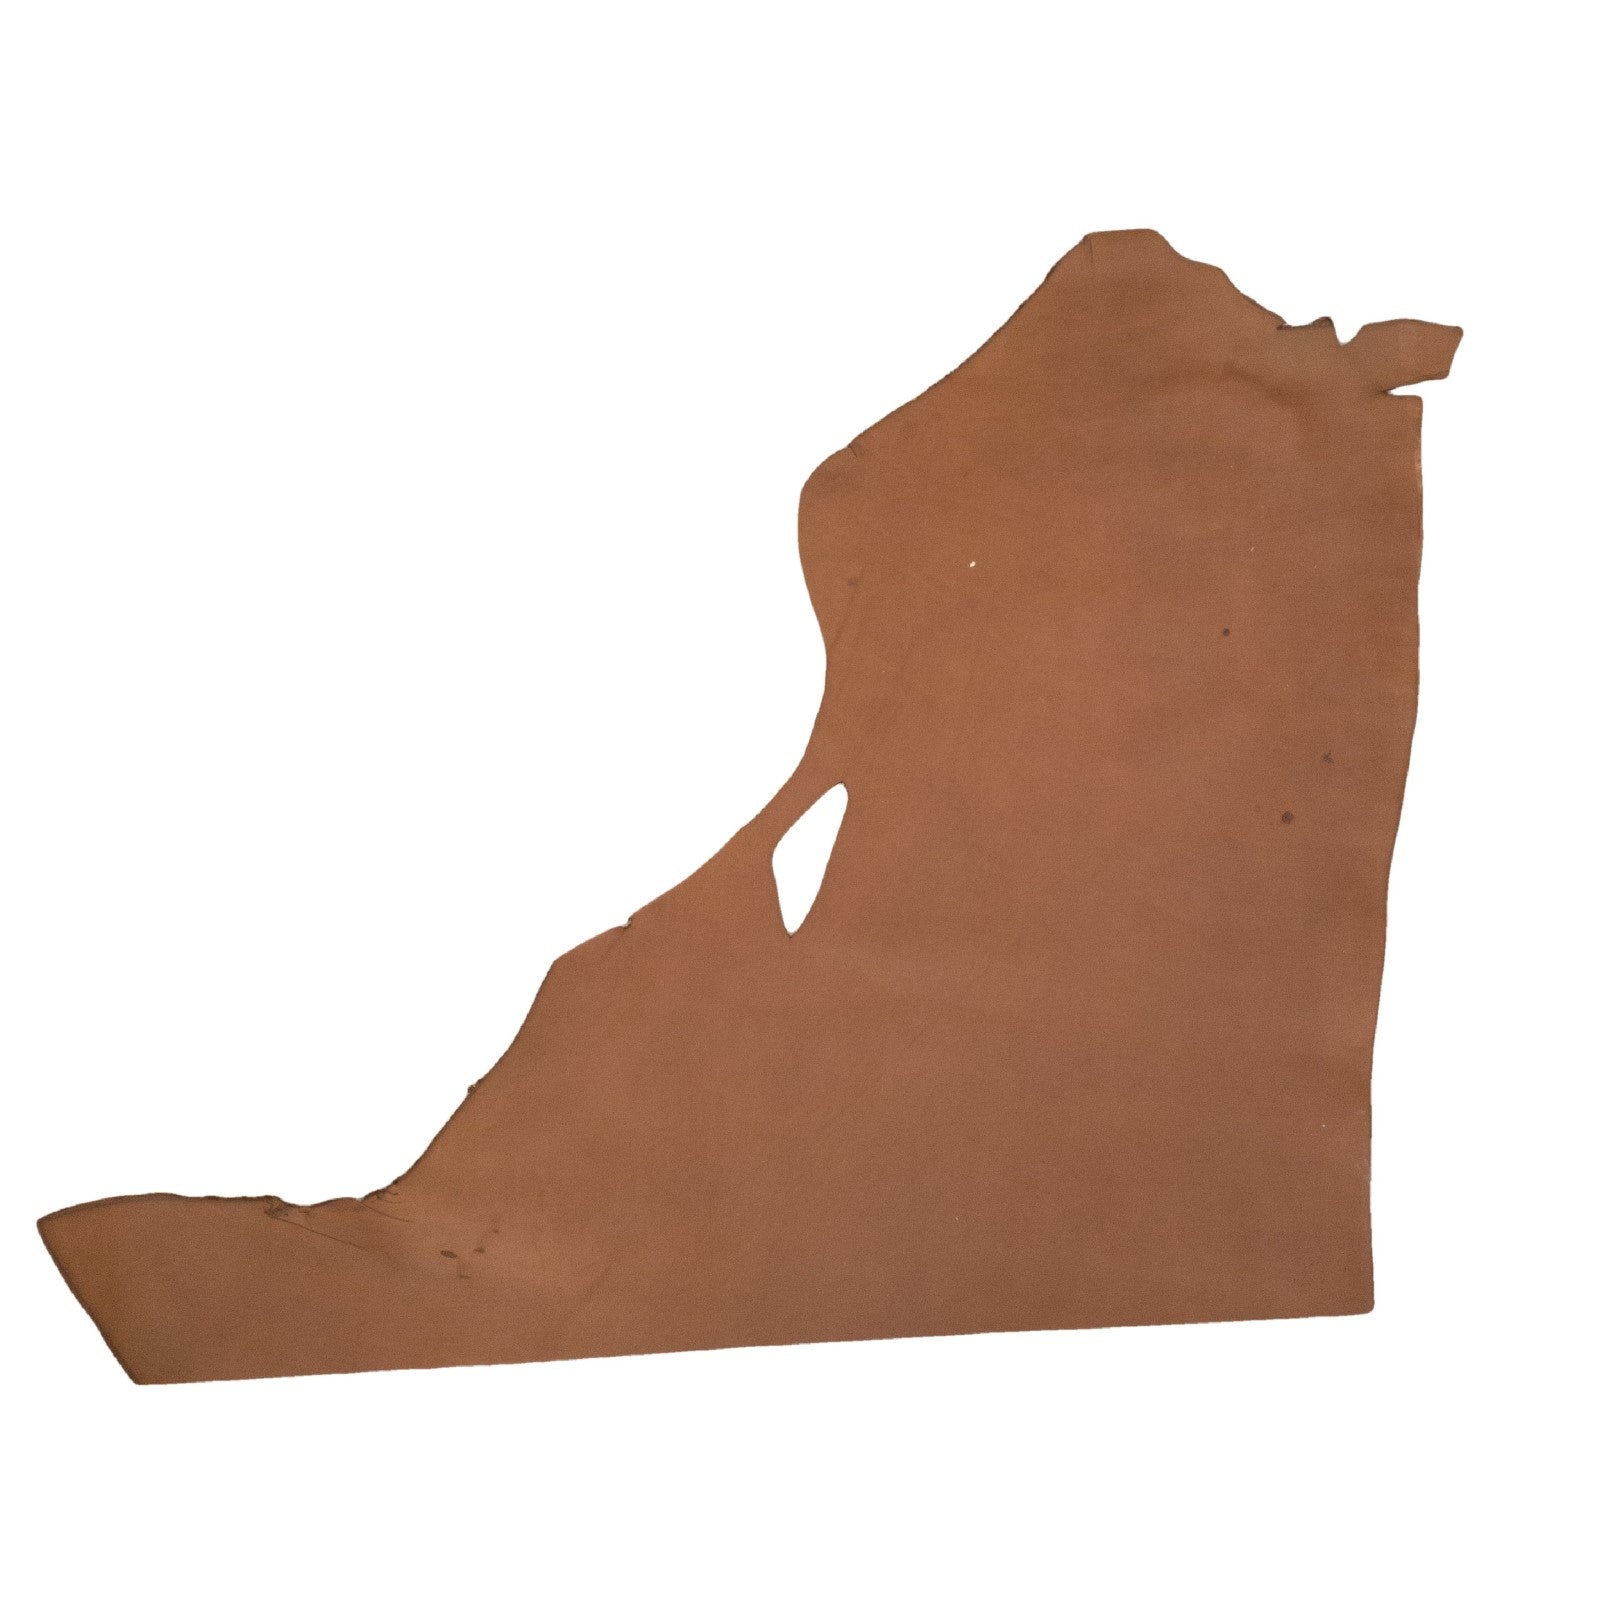 Dove (Red Brown), SB Foot, Non-stock, 3-4oz, Oil Tanned Hides, Top Piece / 6.5 - 7.5 Sq Ft | The Leather Guy